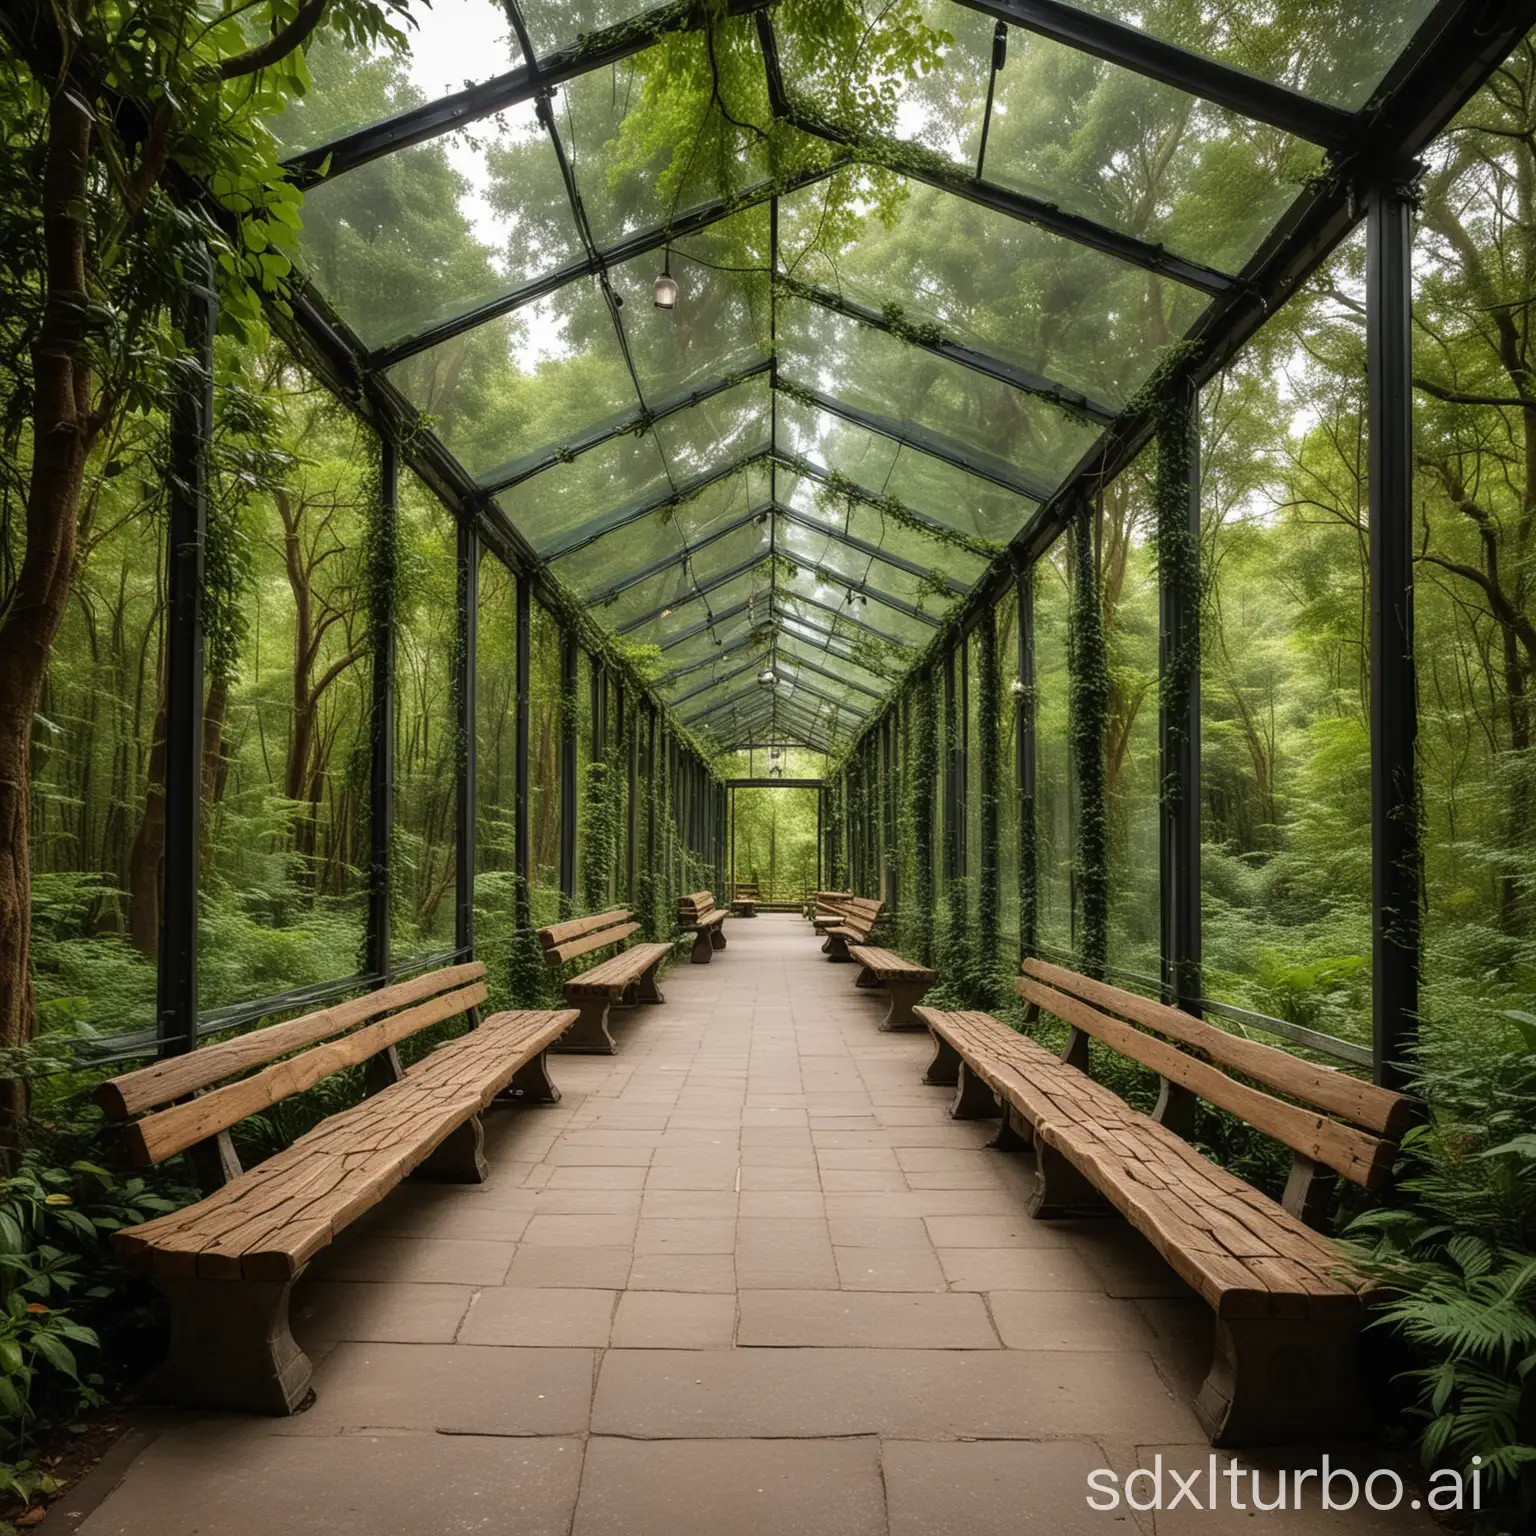 Promenade-with-Glass-Roof-in-Densely-Overgrown-Rainforest